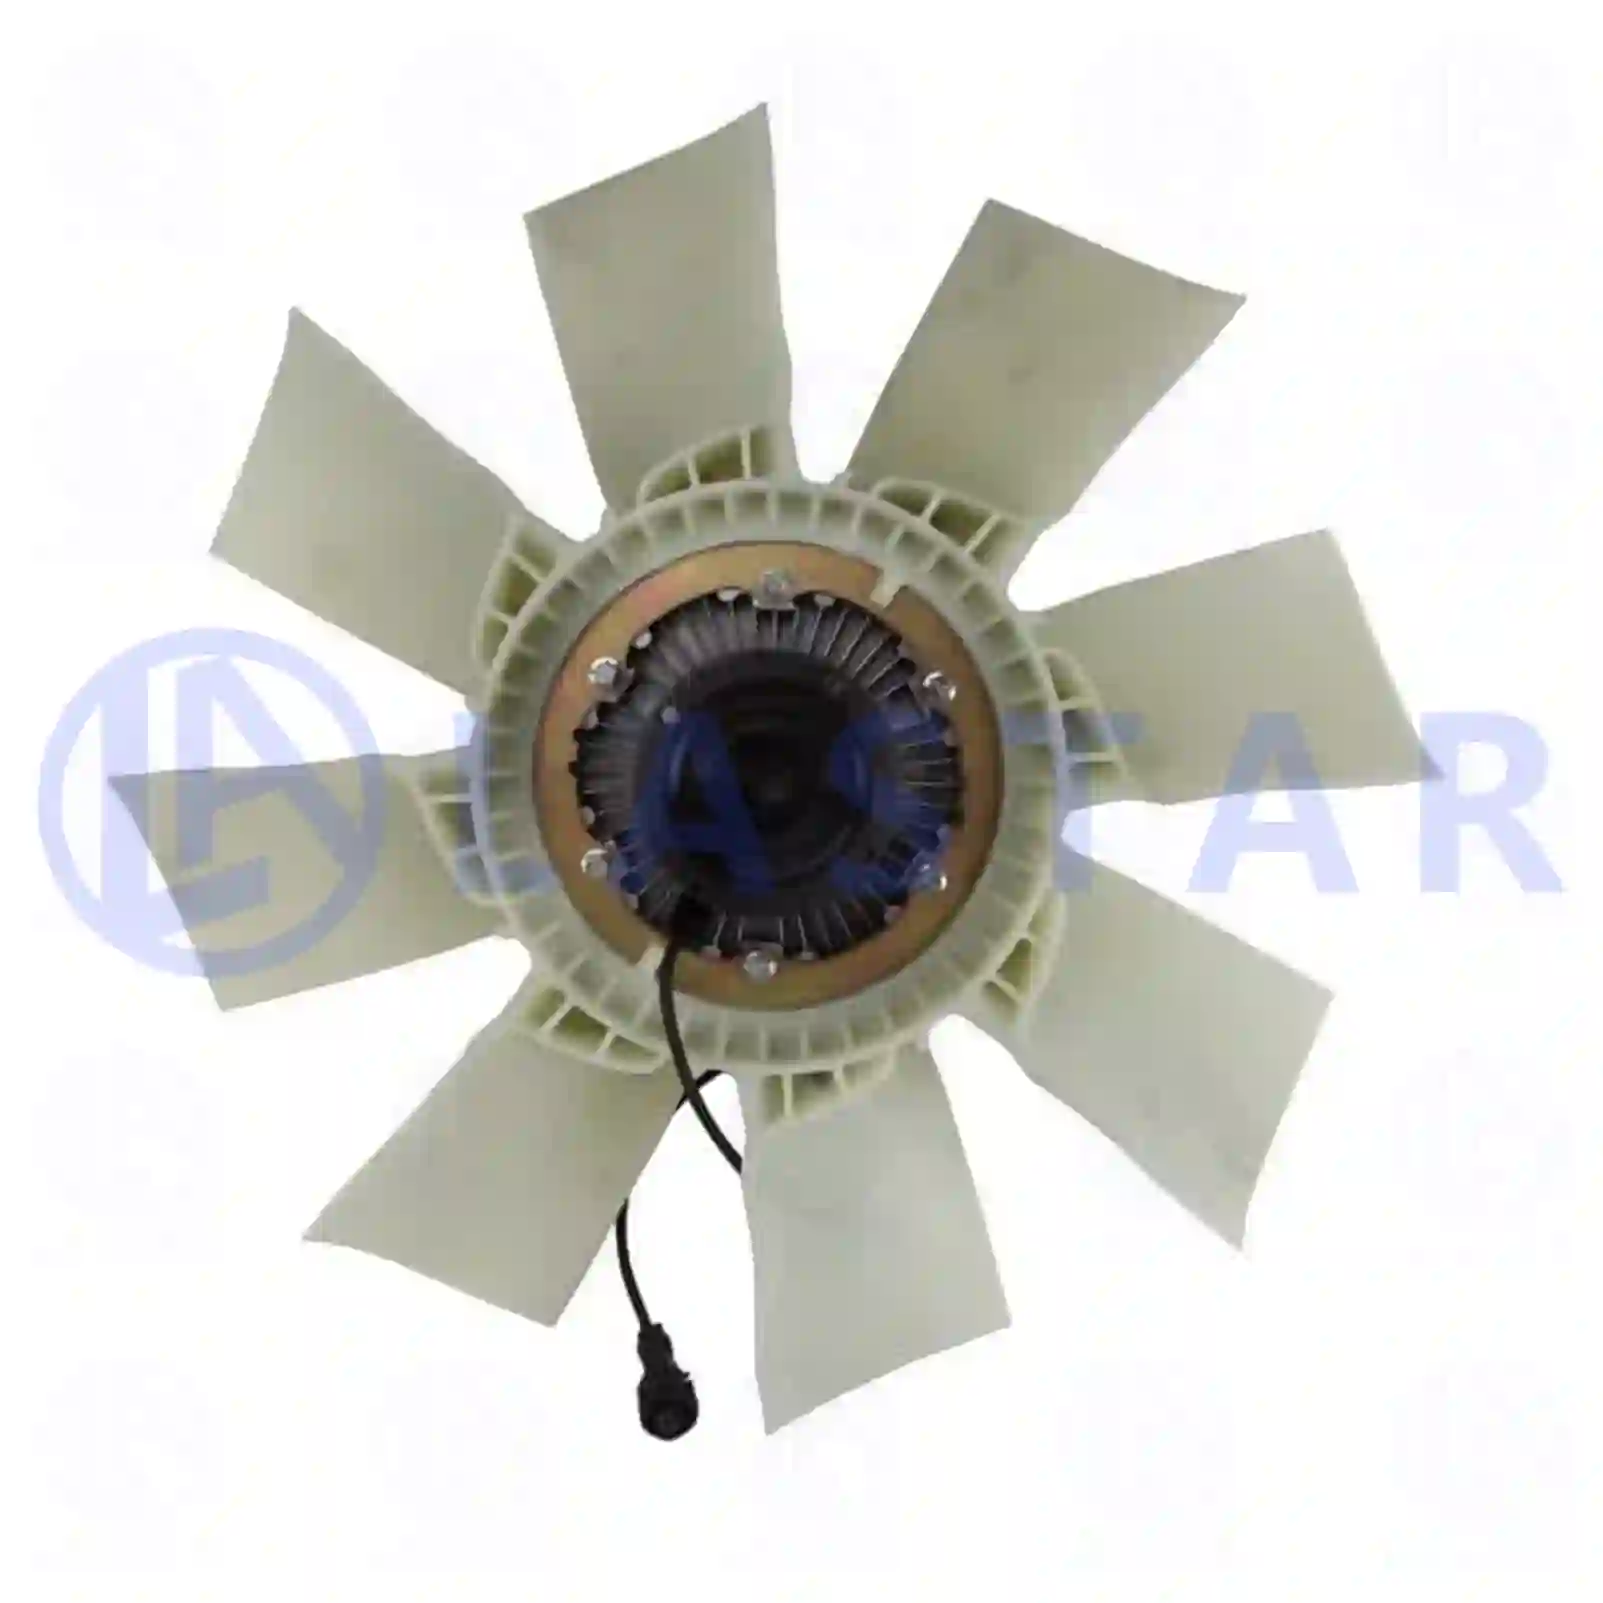 Fan with clutch, 77709418, #YOK ||  77709418 Lastar Spare Part | Truck Spare Parts, Auotomotive Spare Parts Fan with clutch, 77709418, #YOK ||  77709418 Lastar Spare Part | Truck Spare Parts, Auotomotive Spare Parts